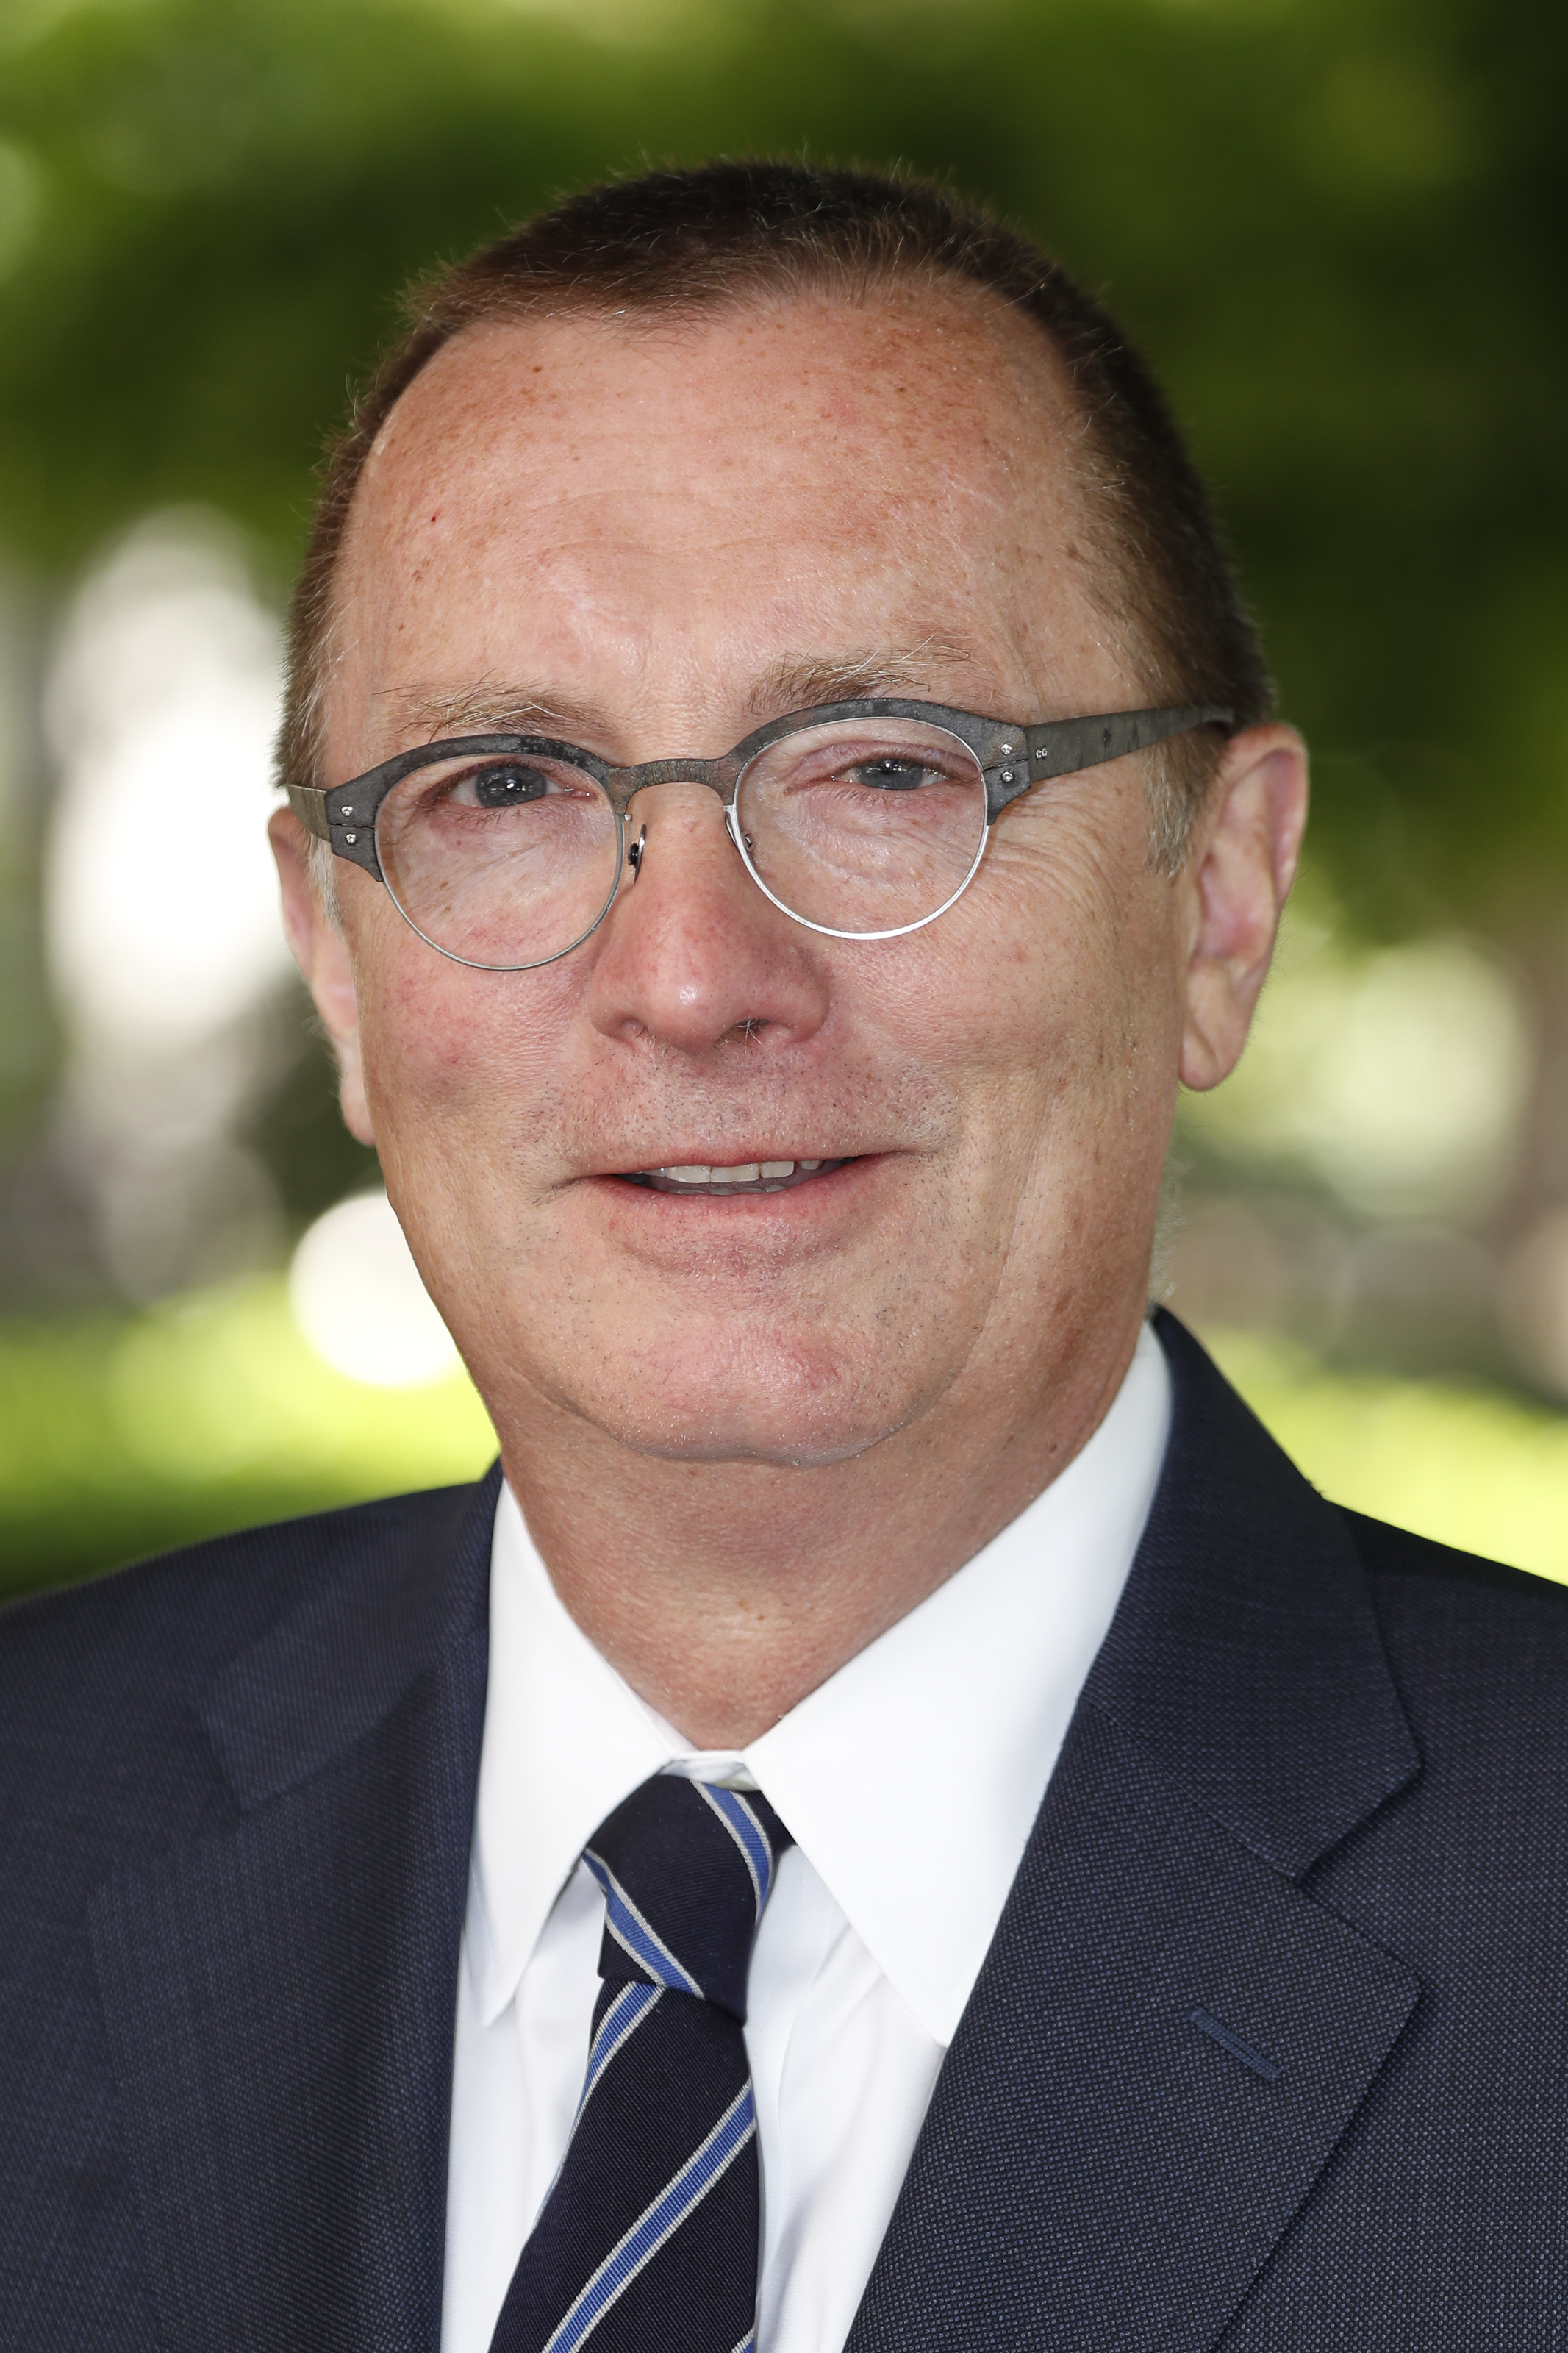 Jeffrey Feltman, Visiting Fellow, Foreign Policy, The Brookings Institution